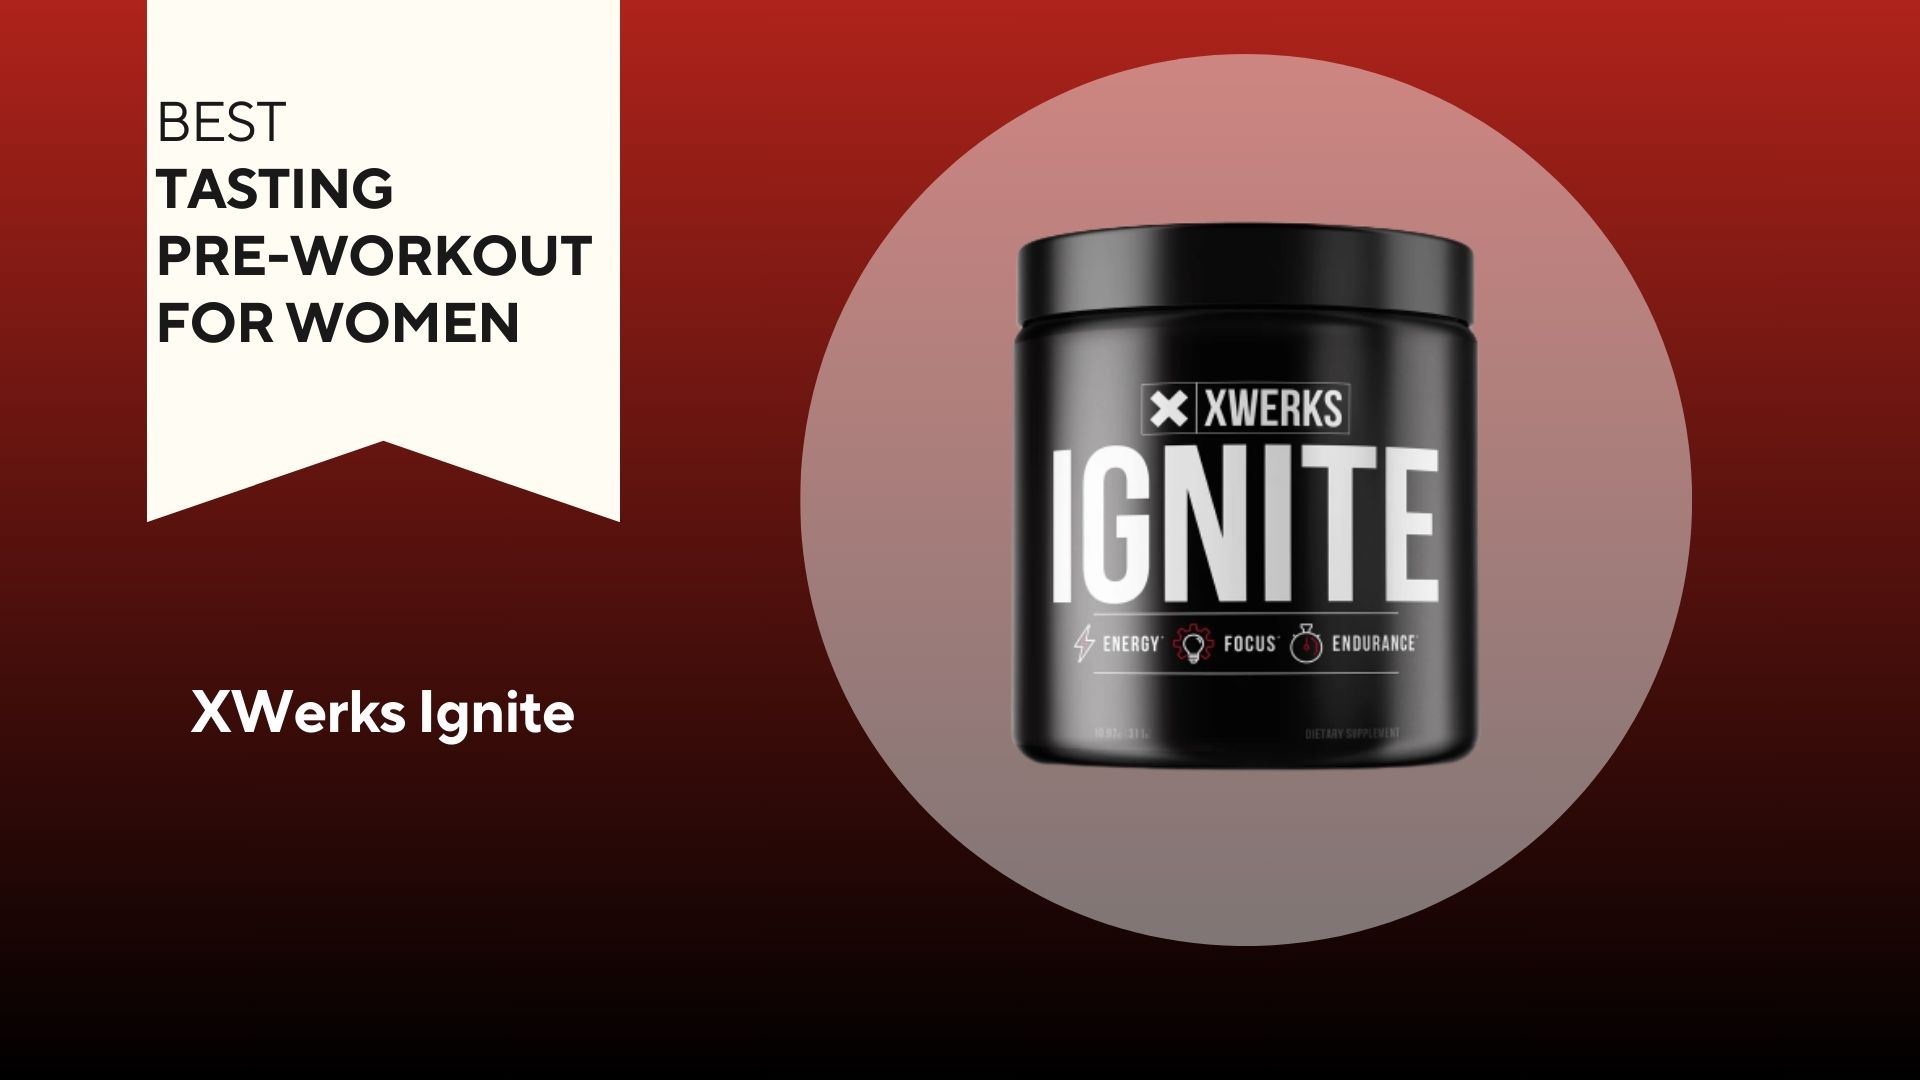 A red background with a white banner that says, "Best Tasting Pre-Workout for Women" next to a black container that says XWerks Ignite in white font